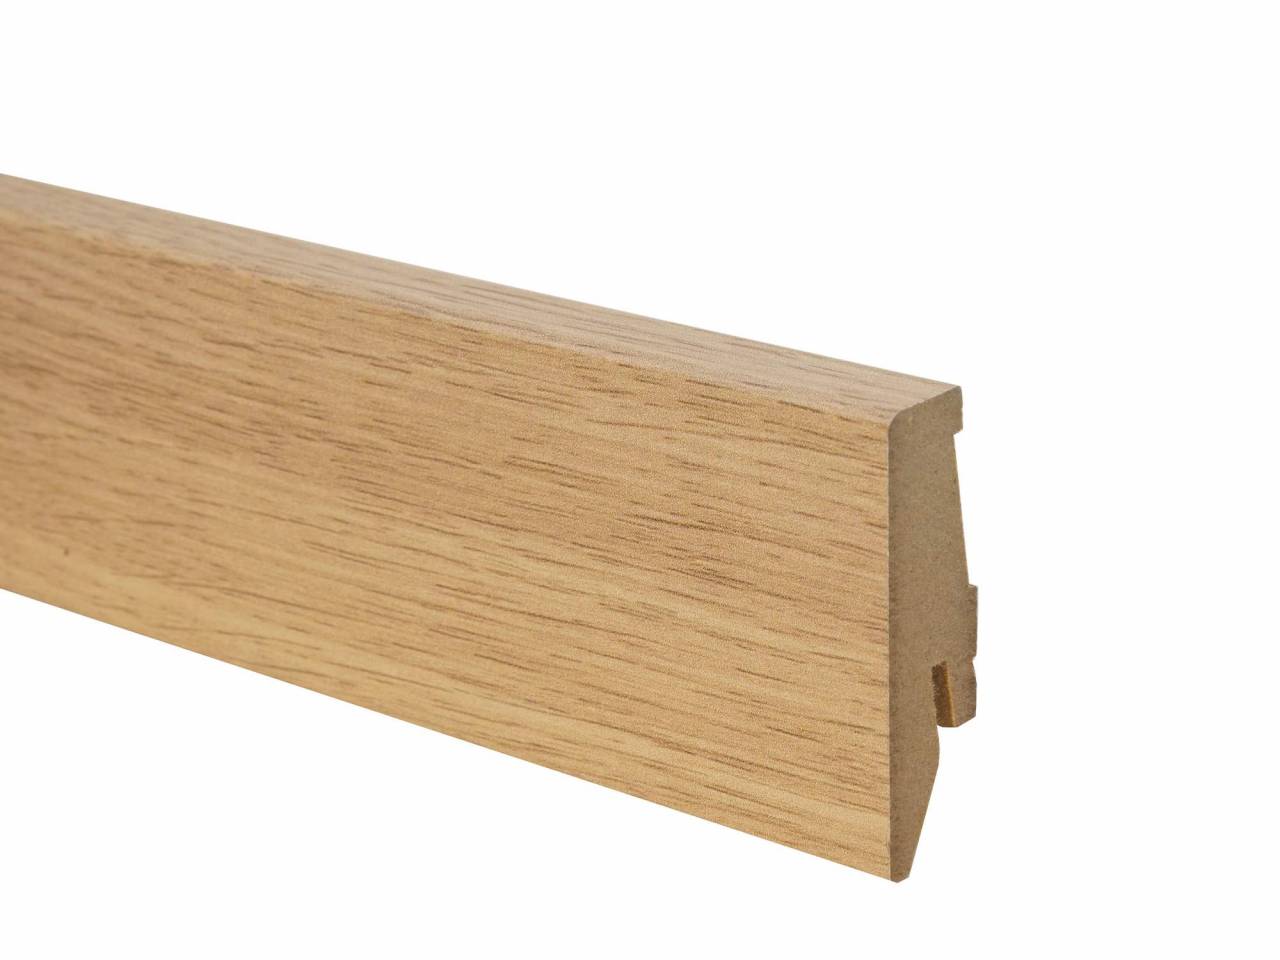 MDF wood floor sill 8220 with cable channel and height 58 mm. Suitable for laminate flooring in yellow-beige colour.